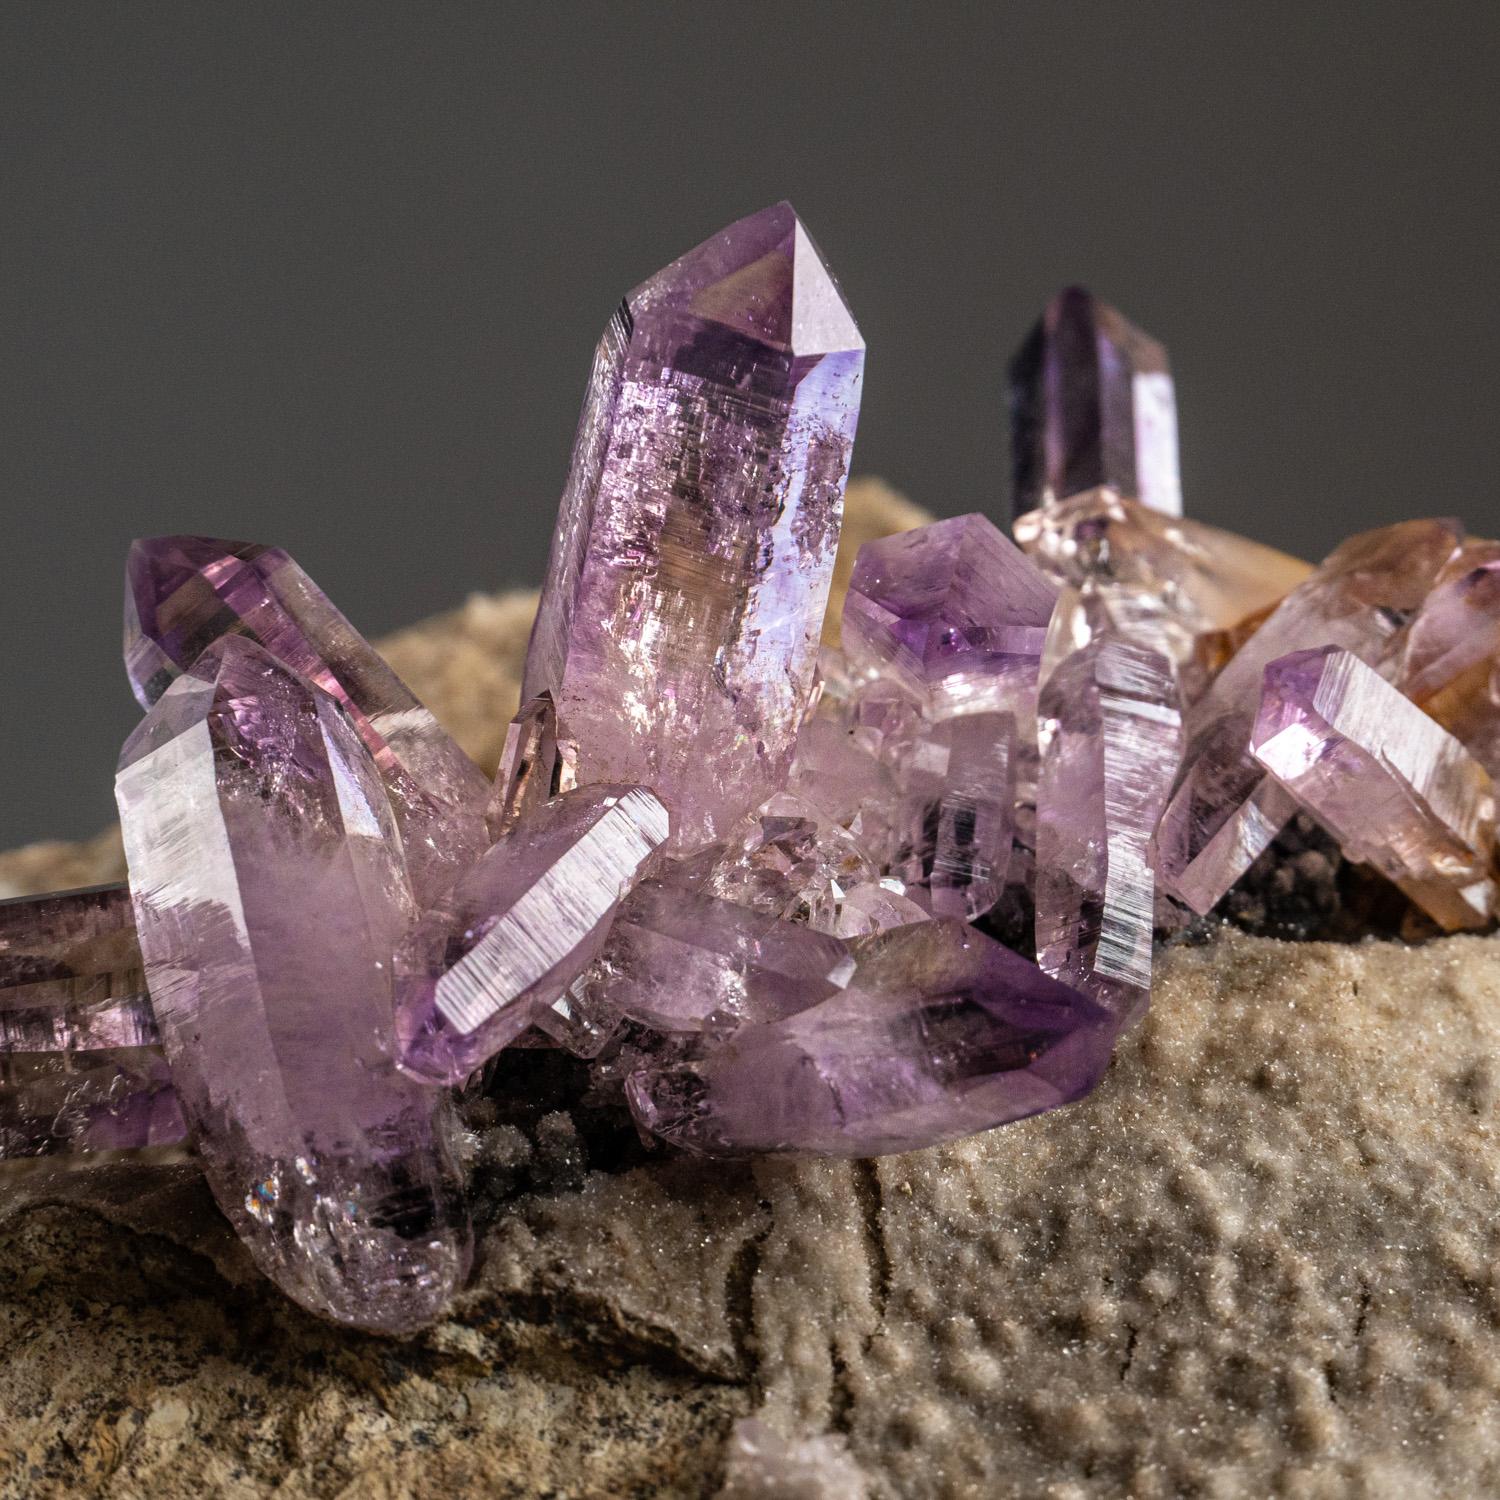 Beautiful specimen from Piedra Parada, Las Vigas de Ramirez, Veracruz, Mexico. Parallel formation of amethyst crystals with great transparency and rich purple color with well defined phantom zoning. The crystals are fully terminated with lustrous